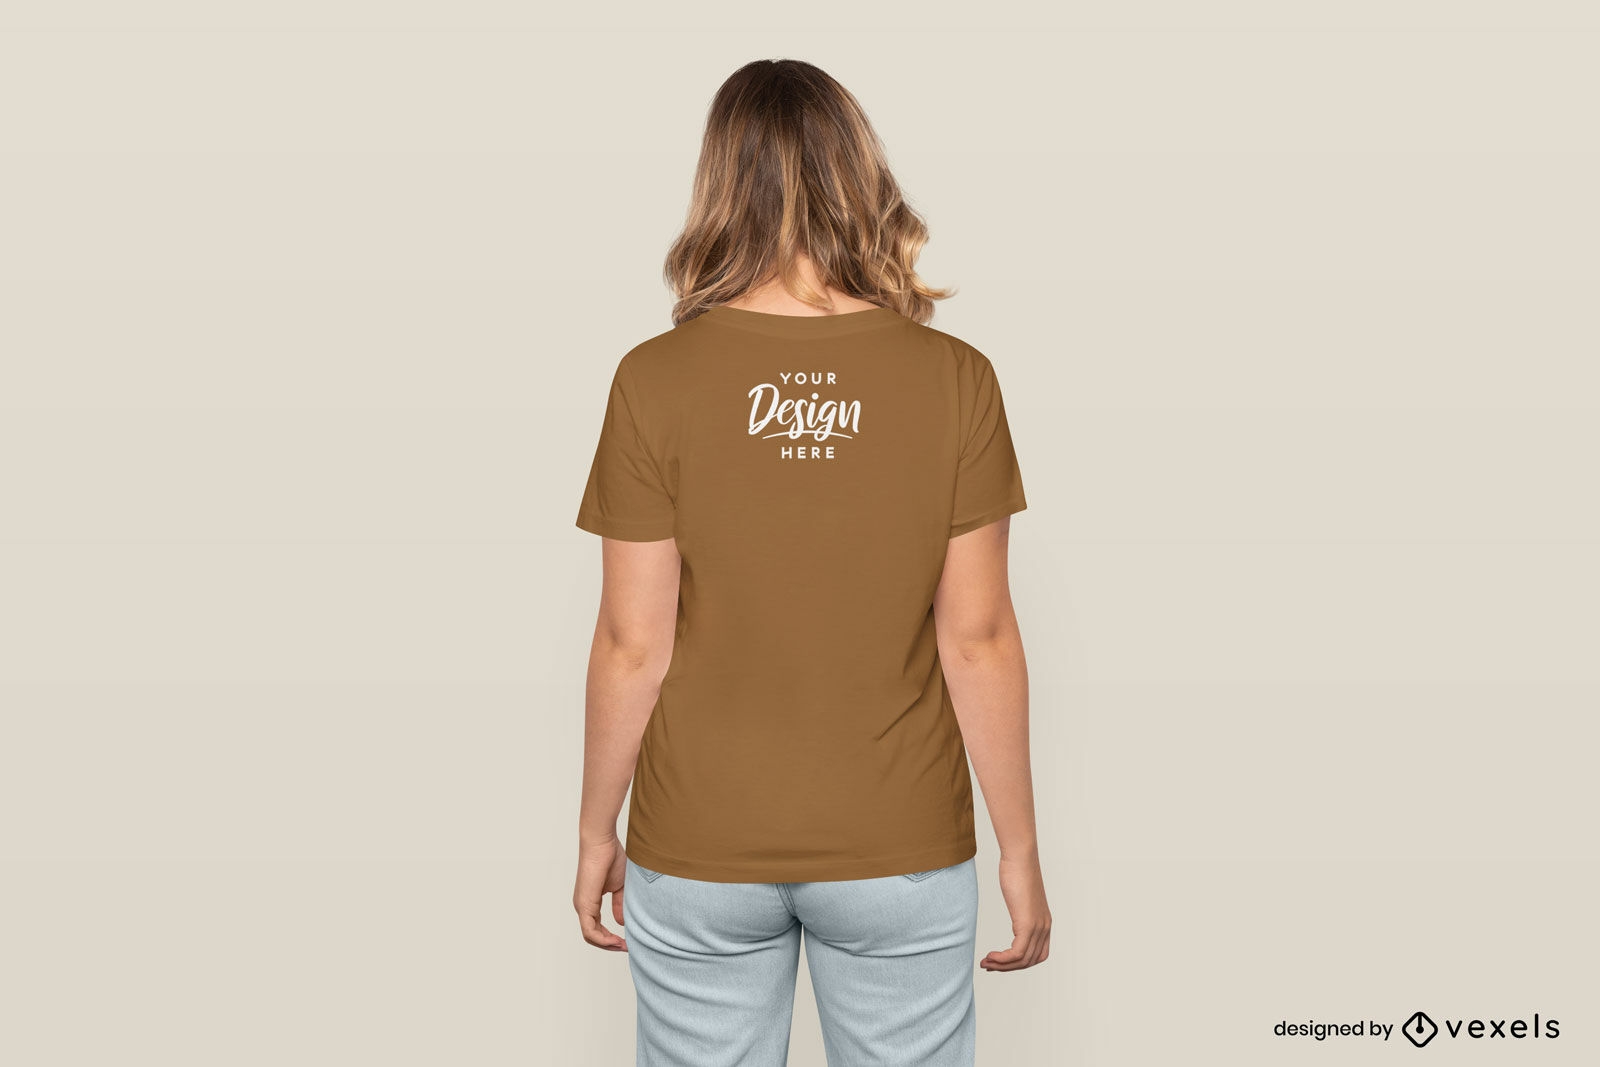 Blondes weibliches Modell hinteres T-Shirt-Modell